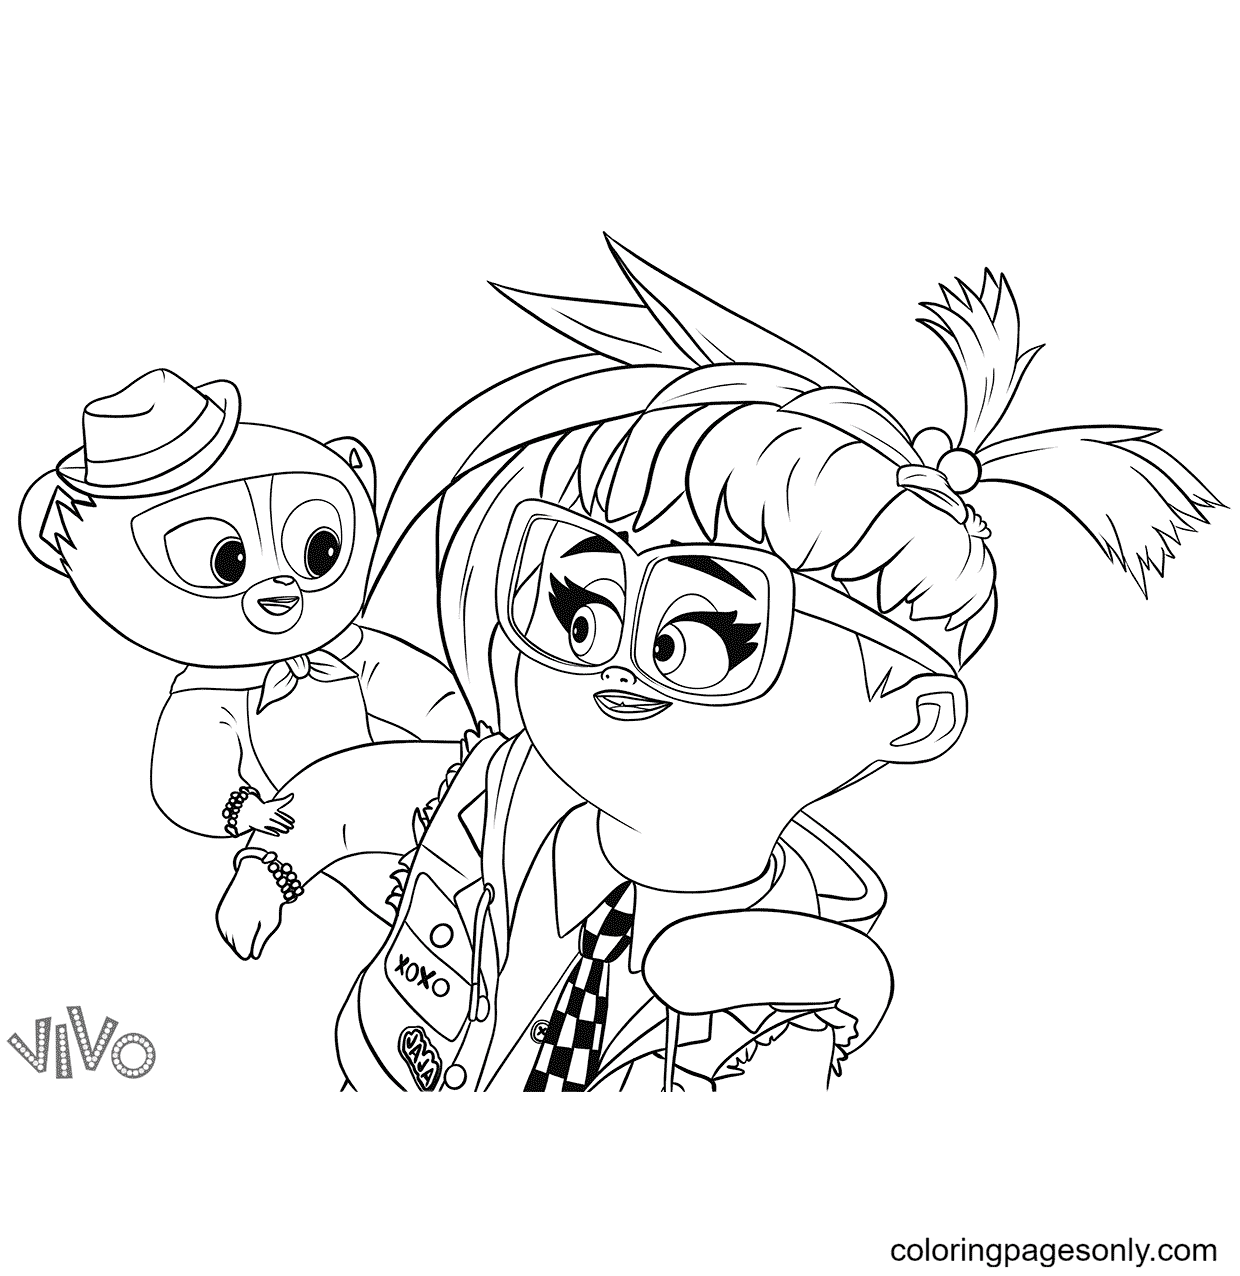 Monkey Vivo and Gabriela Coloring Pages - Vivo Coloring Pages